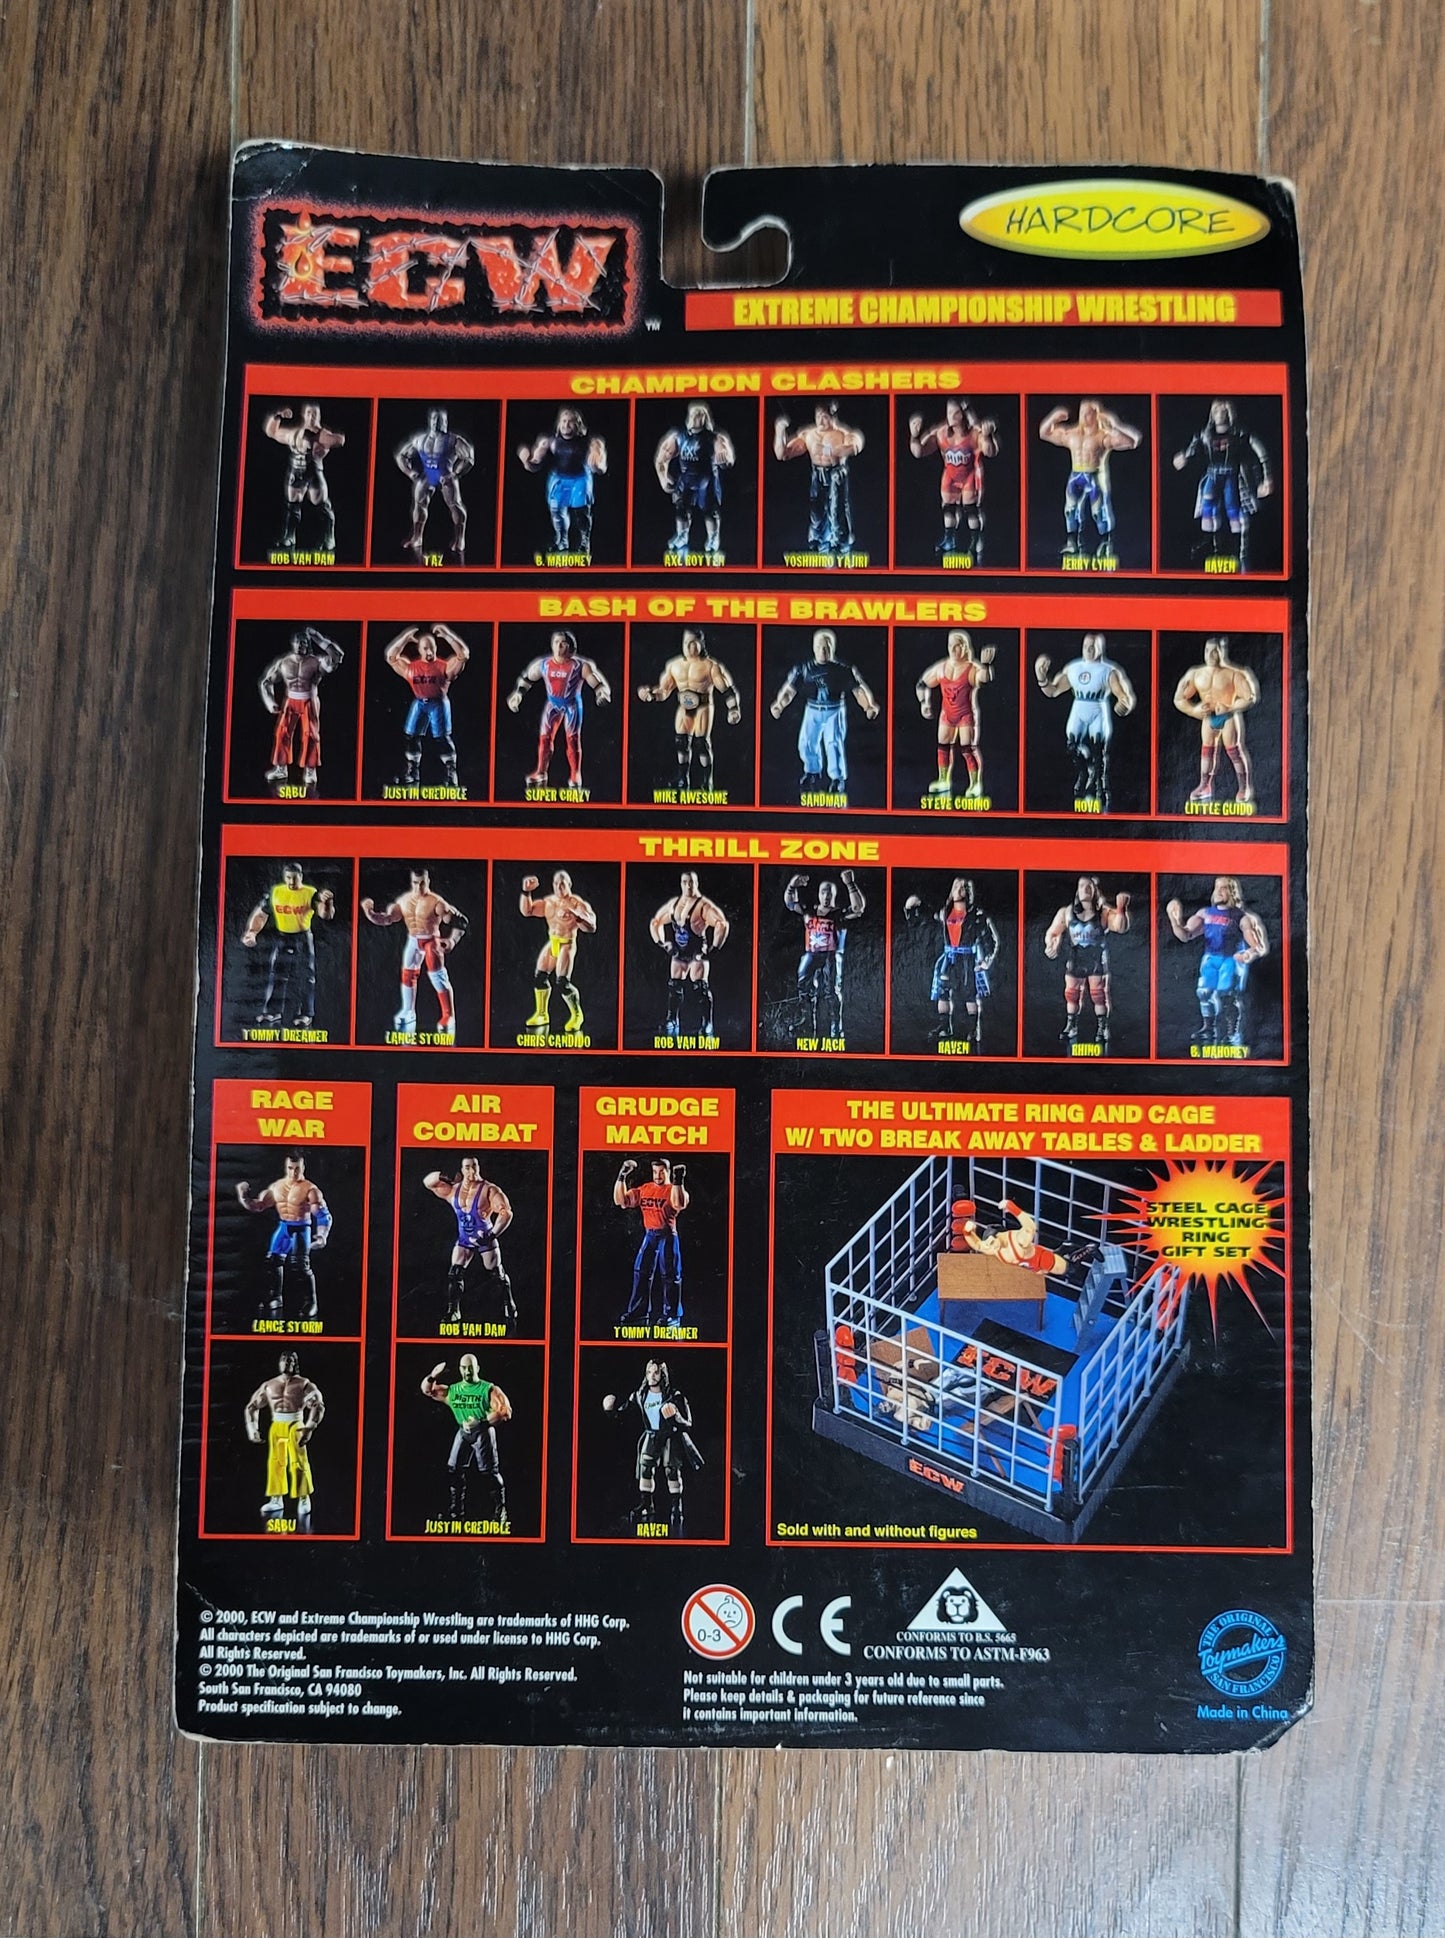 2000 Toy Makers ECW Justin Credible Bash Brawlers Hardcore Wrestling Action Figure